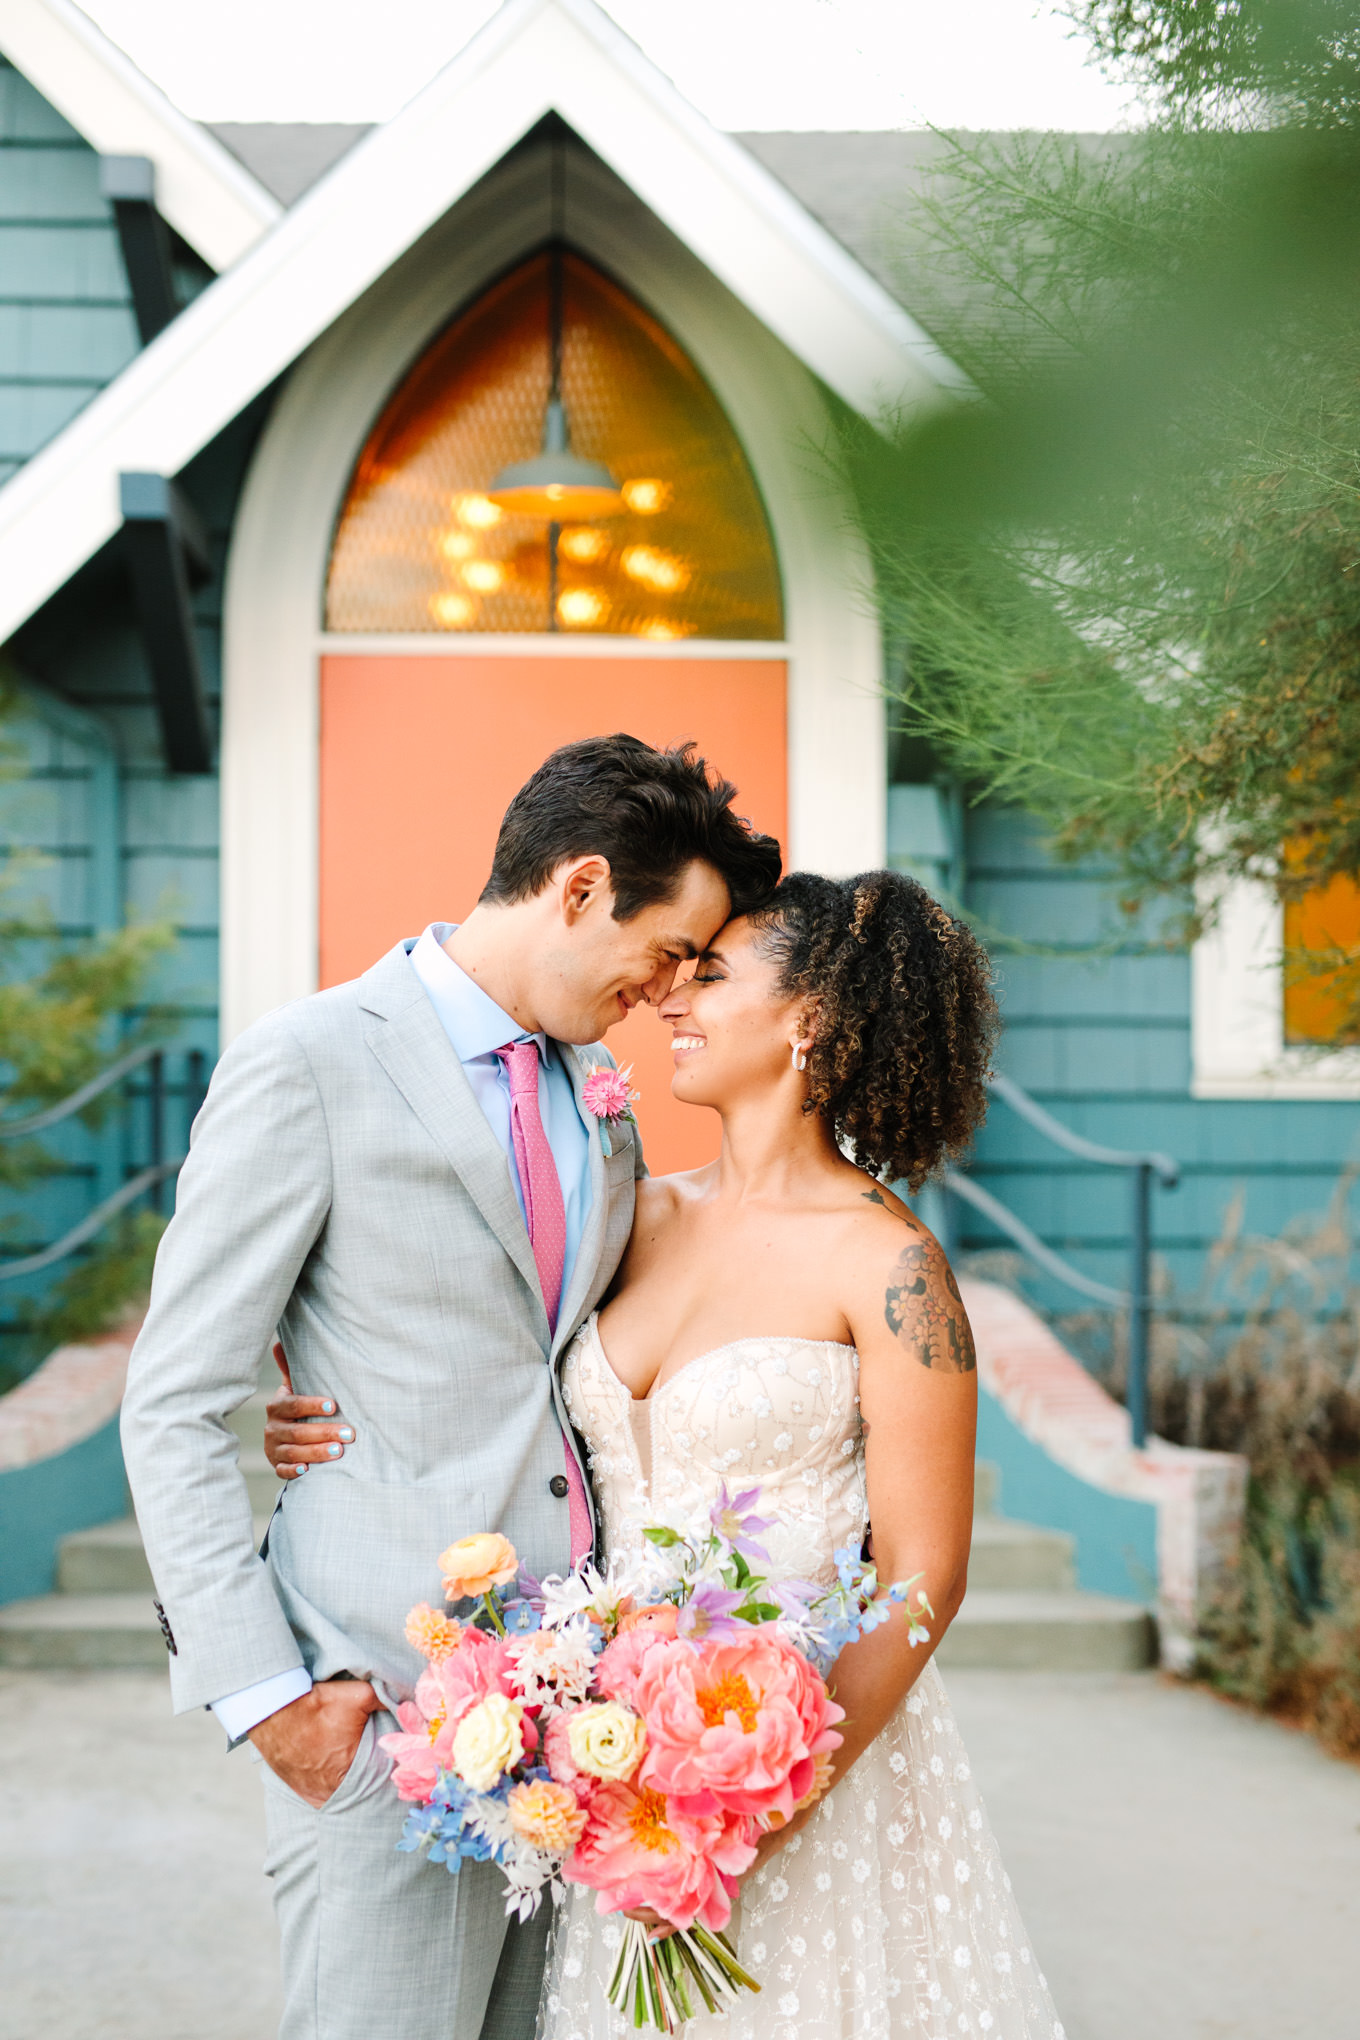 Wedding portrait of pastel couple in front of orange doorway | Colorful pop-up micro wedding at The Ruby Street Los Angeles featured on Green Wedding Shoes | Colorful and elevated photography for fun-loving couples in Southern California | #colorfulwedding #popupwedding #weddingphotography #microwedding Source: Mary Costa Photography | Los Angeles